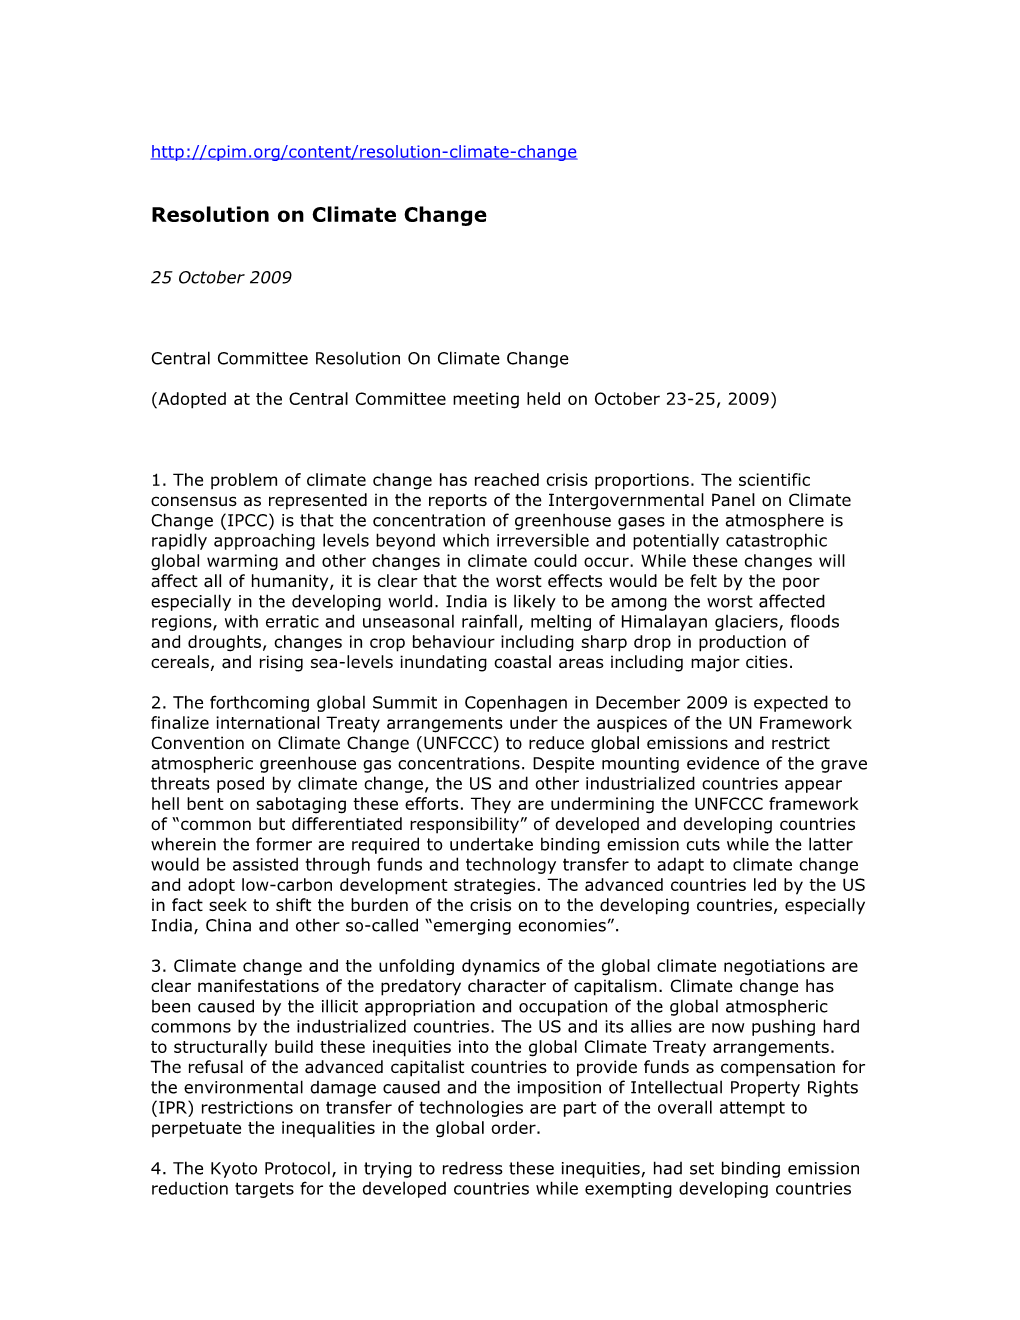 Resolution on Climate Change